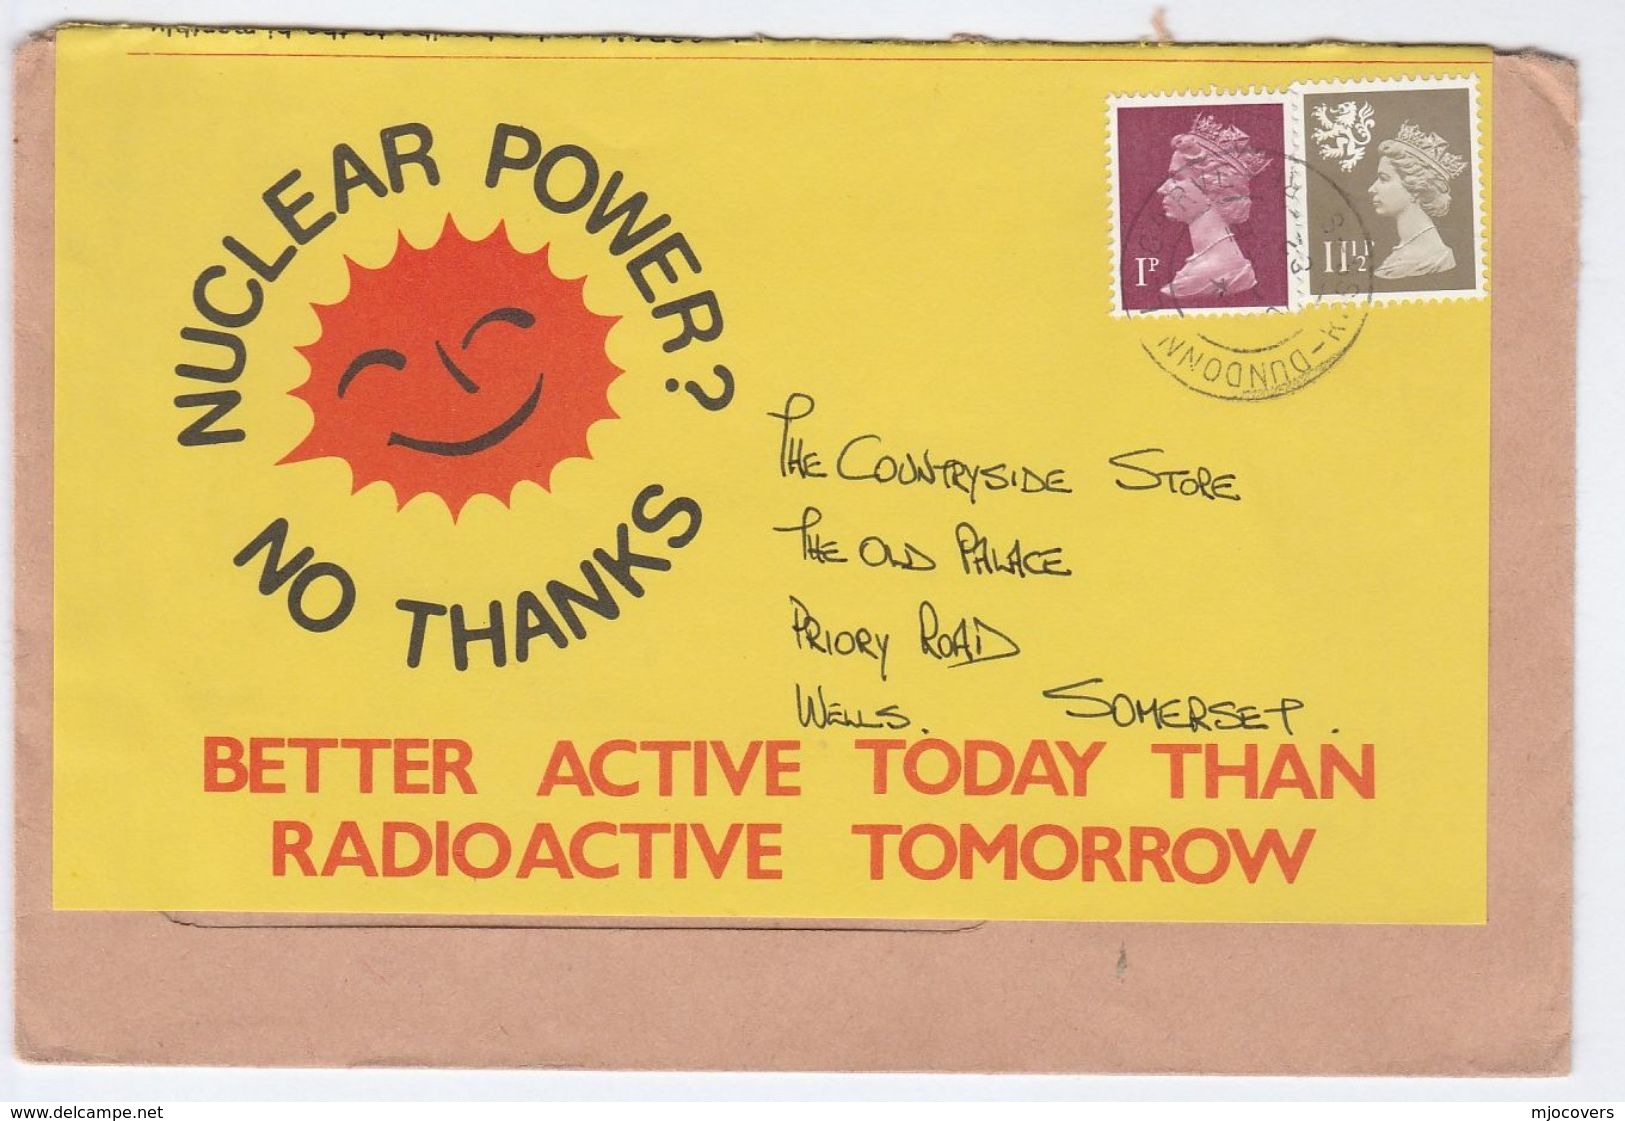 1982 Dundonnell NUCLEAR POWER NO THANKS COVER Re-use Label BETTER ACTIVE TODAY THAN RADIOACTIVE Atomic Energy Gb Stamps - Atoom